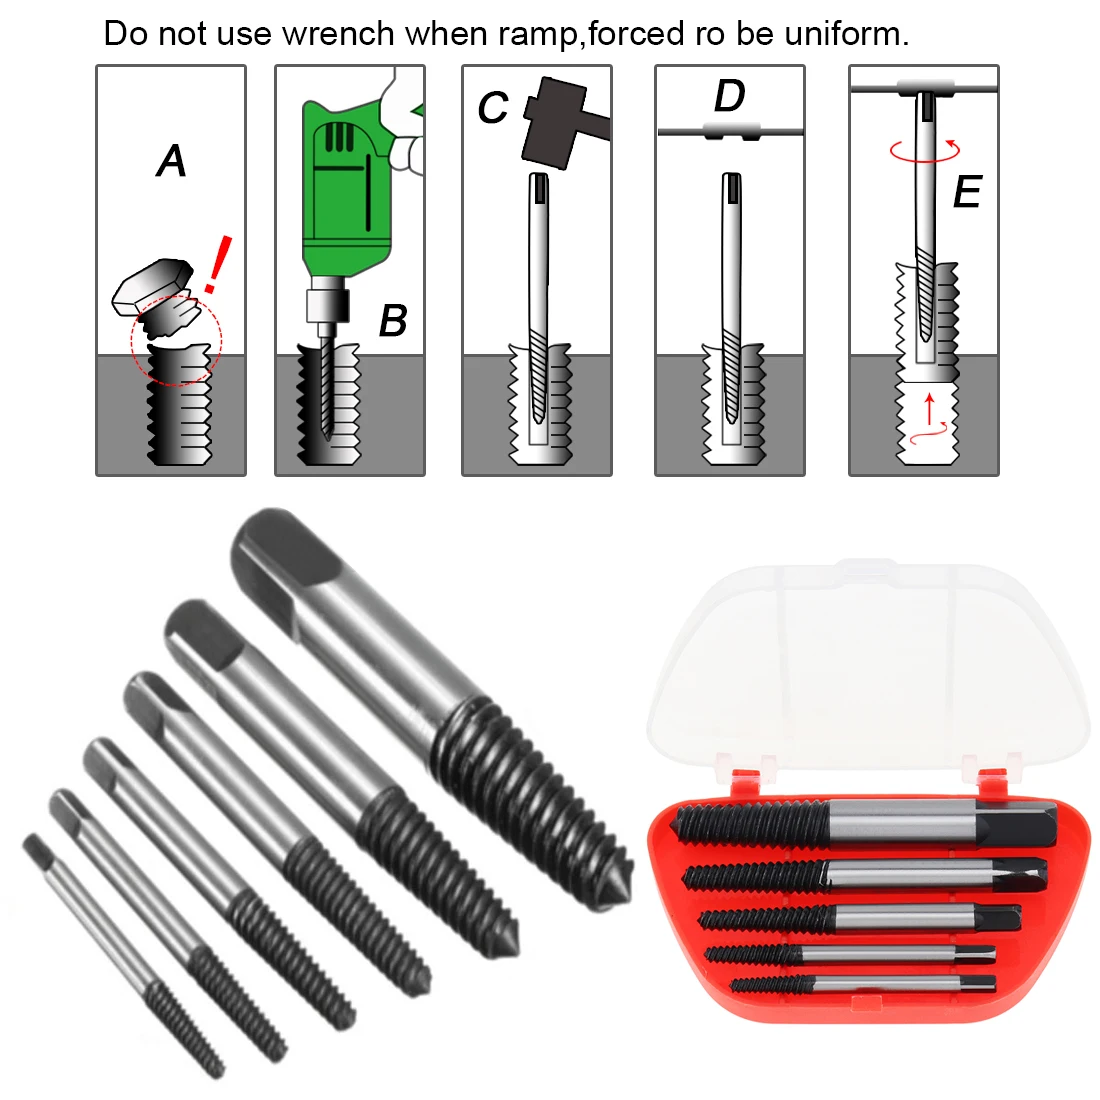 H/P 3.5mm Alloy Steel Screw Extractor Easy Out Guide Broken Screws Bolt Remover 